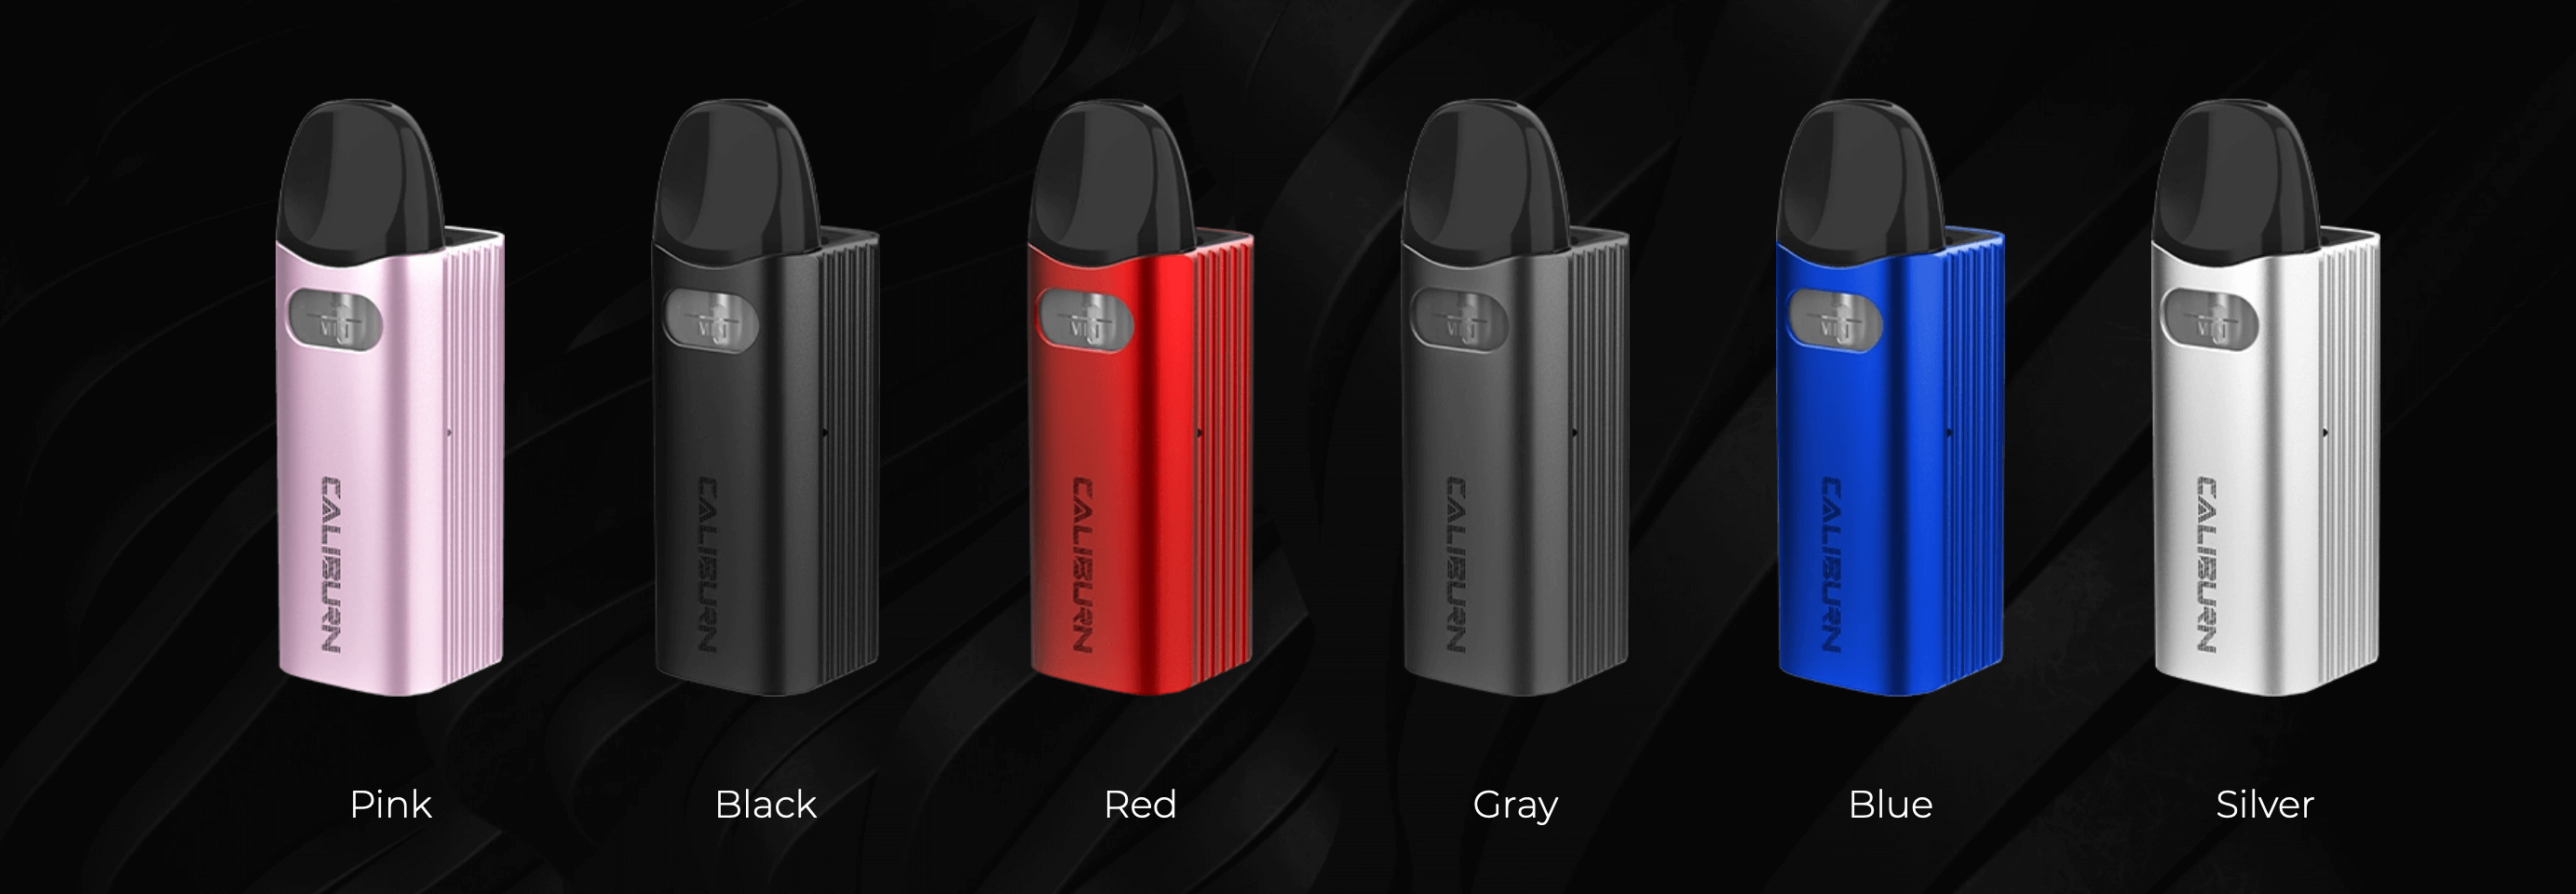 Caliburn AZ3 Pod Kit by Uwell - 6 Stylish Colour Options | Pink, Black, Red, Grey, Blue and Silver